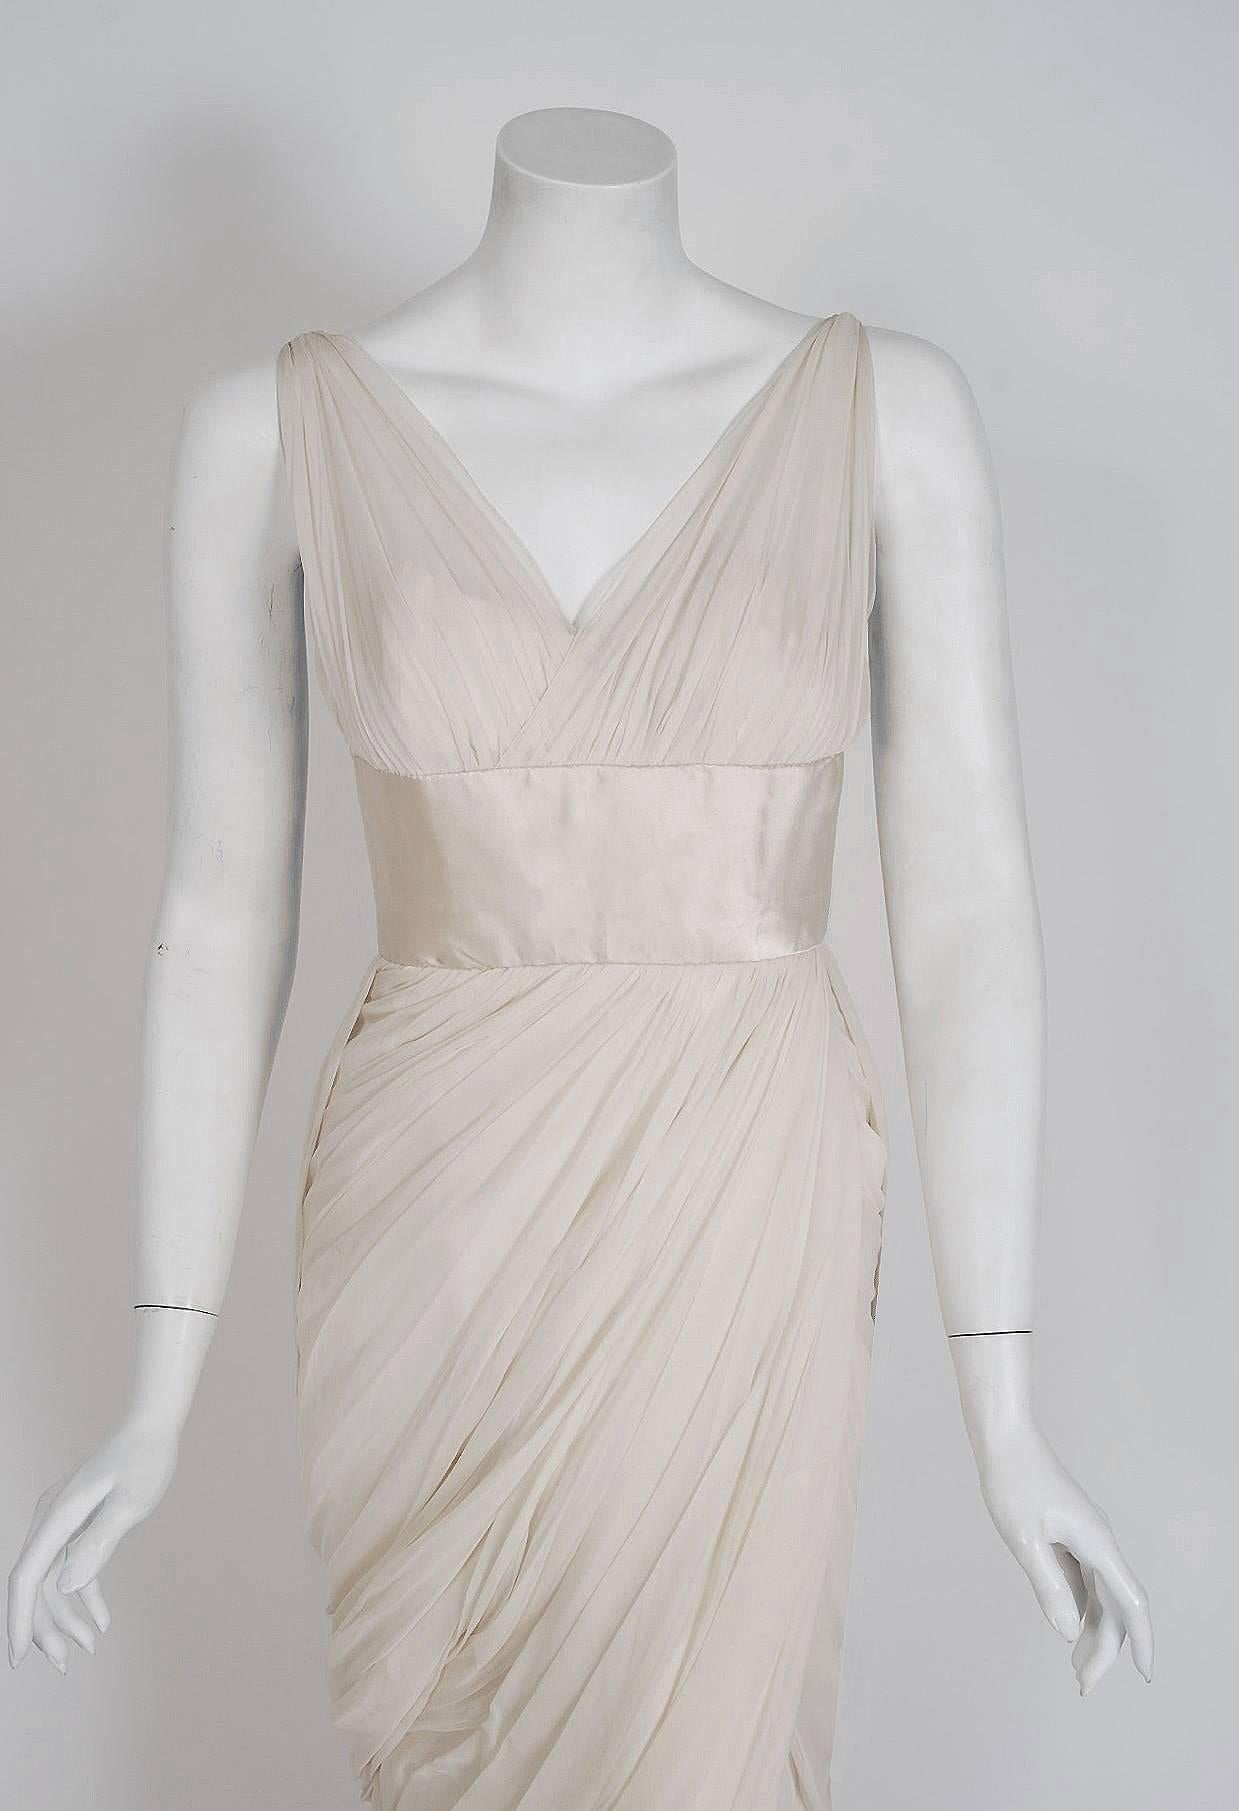 Jean Desses is one of the most important designers of the 20th century and was a designated Haute Couture house under the official Chambre Syndicate de la Couture. This exquisite 1950's goddess gown is a rare design made for the American market